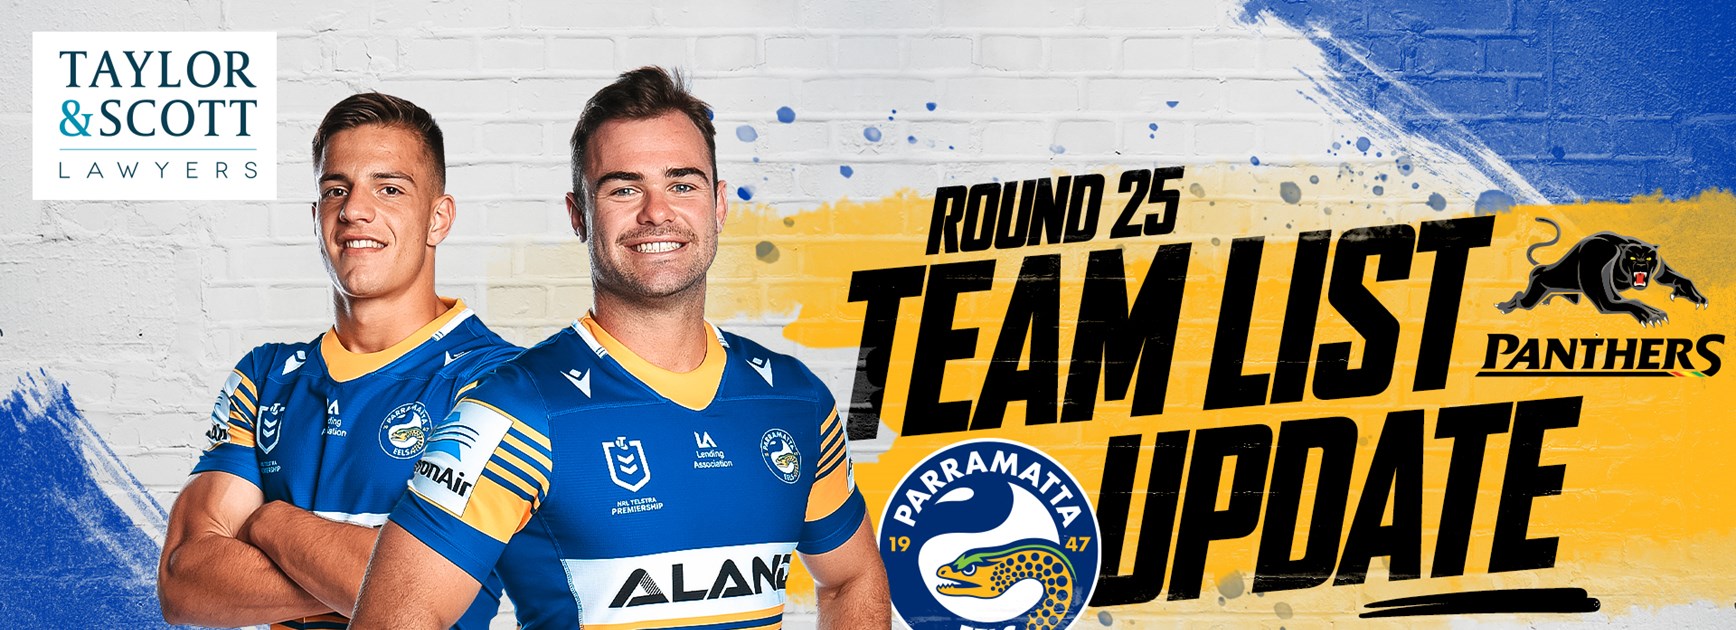 Team List Update - Eels v Panthers, Round 25